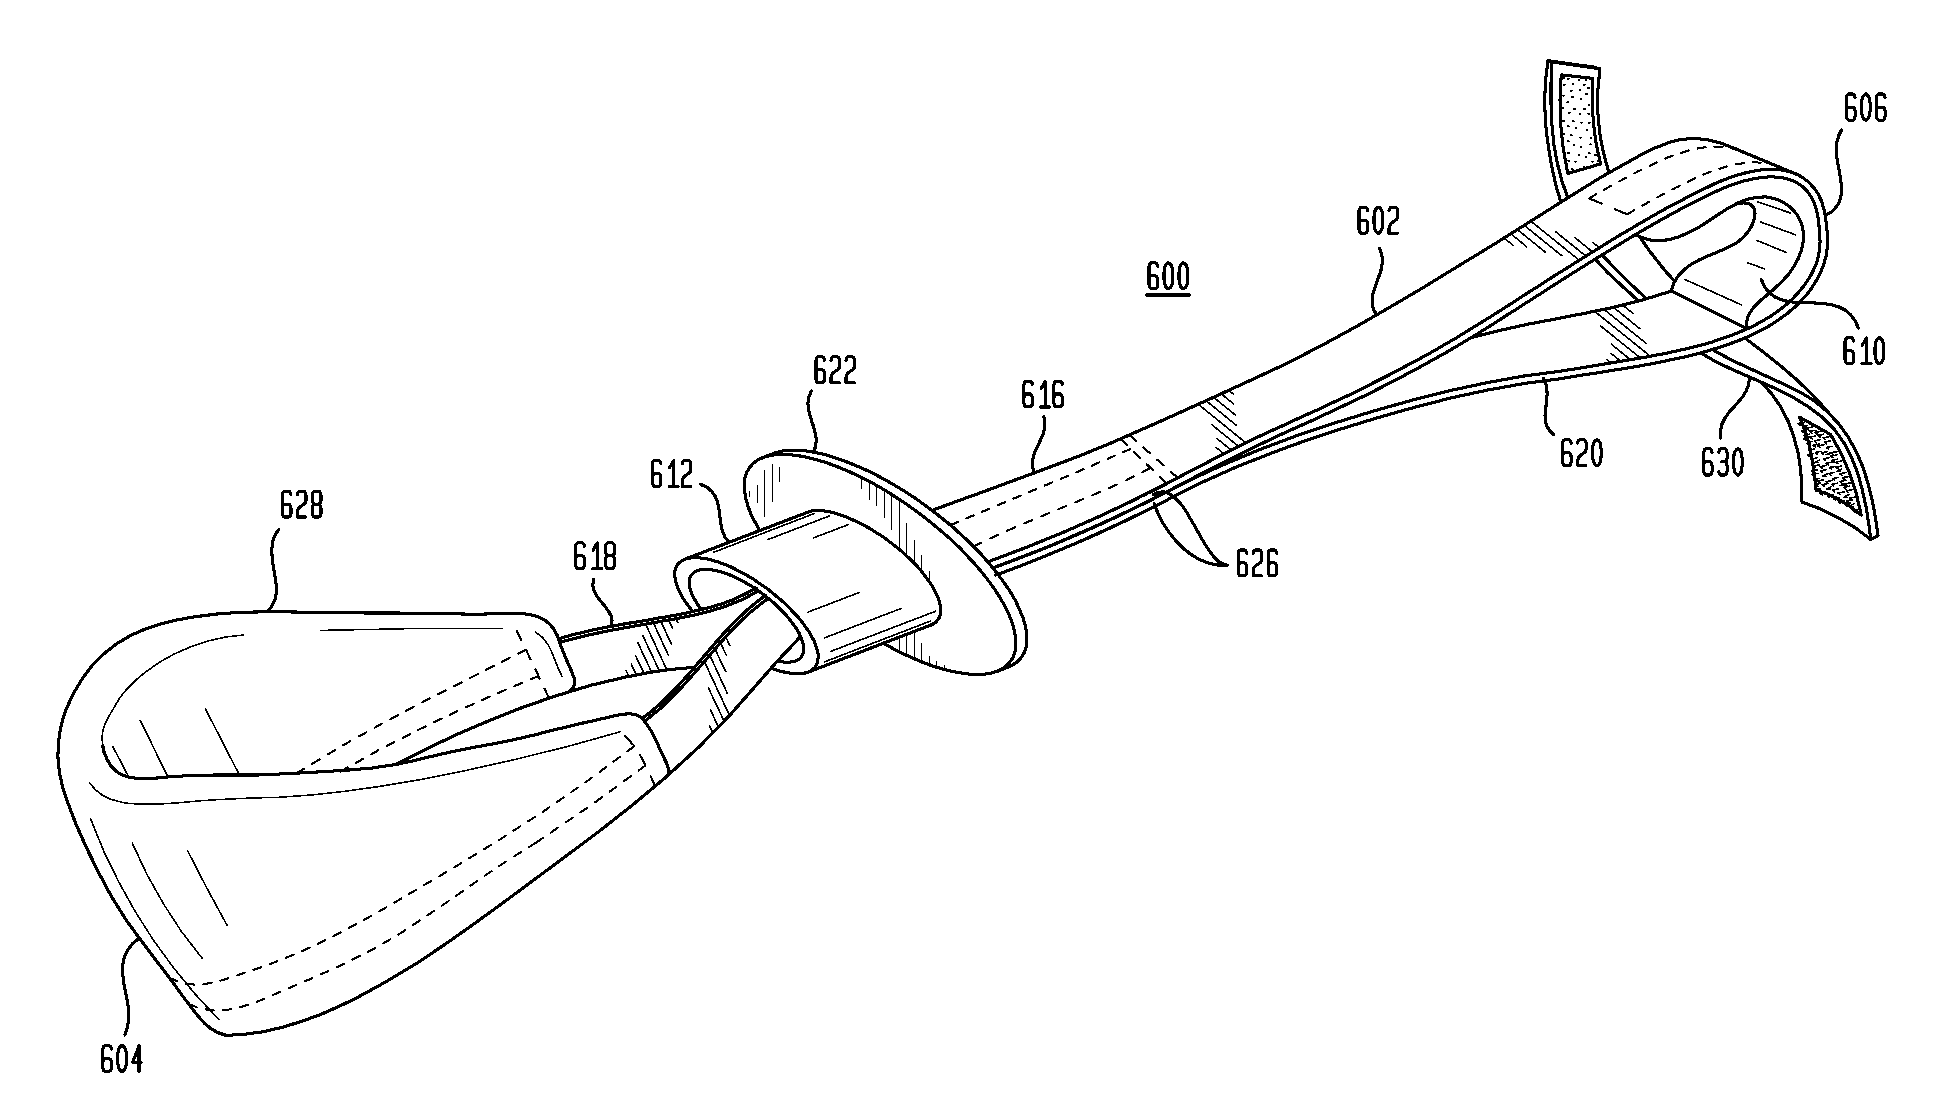 Apparatus and method for lifting weights